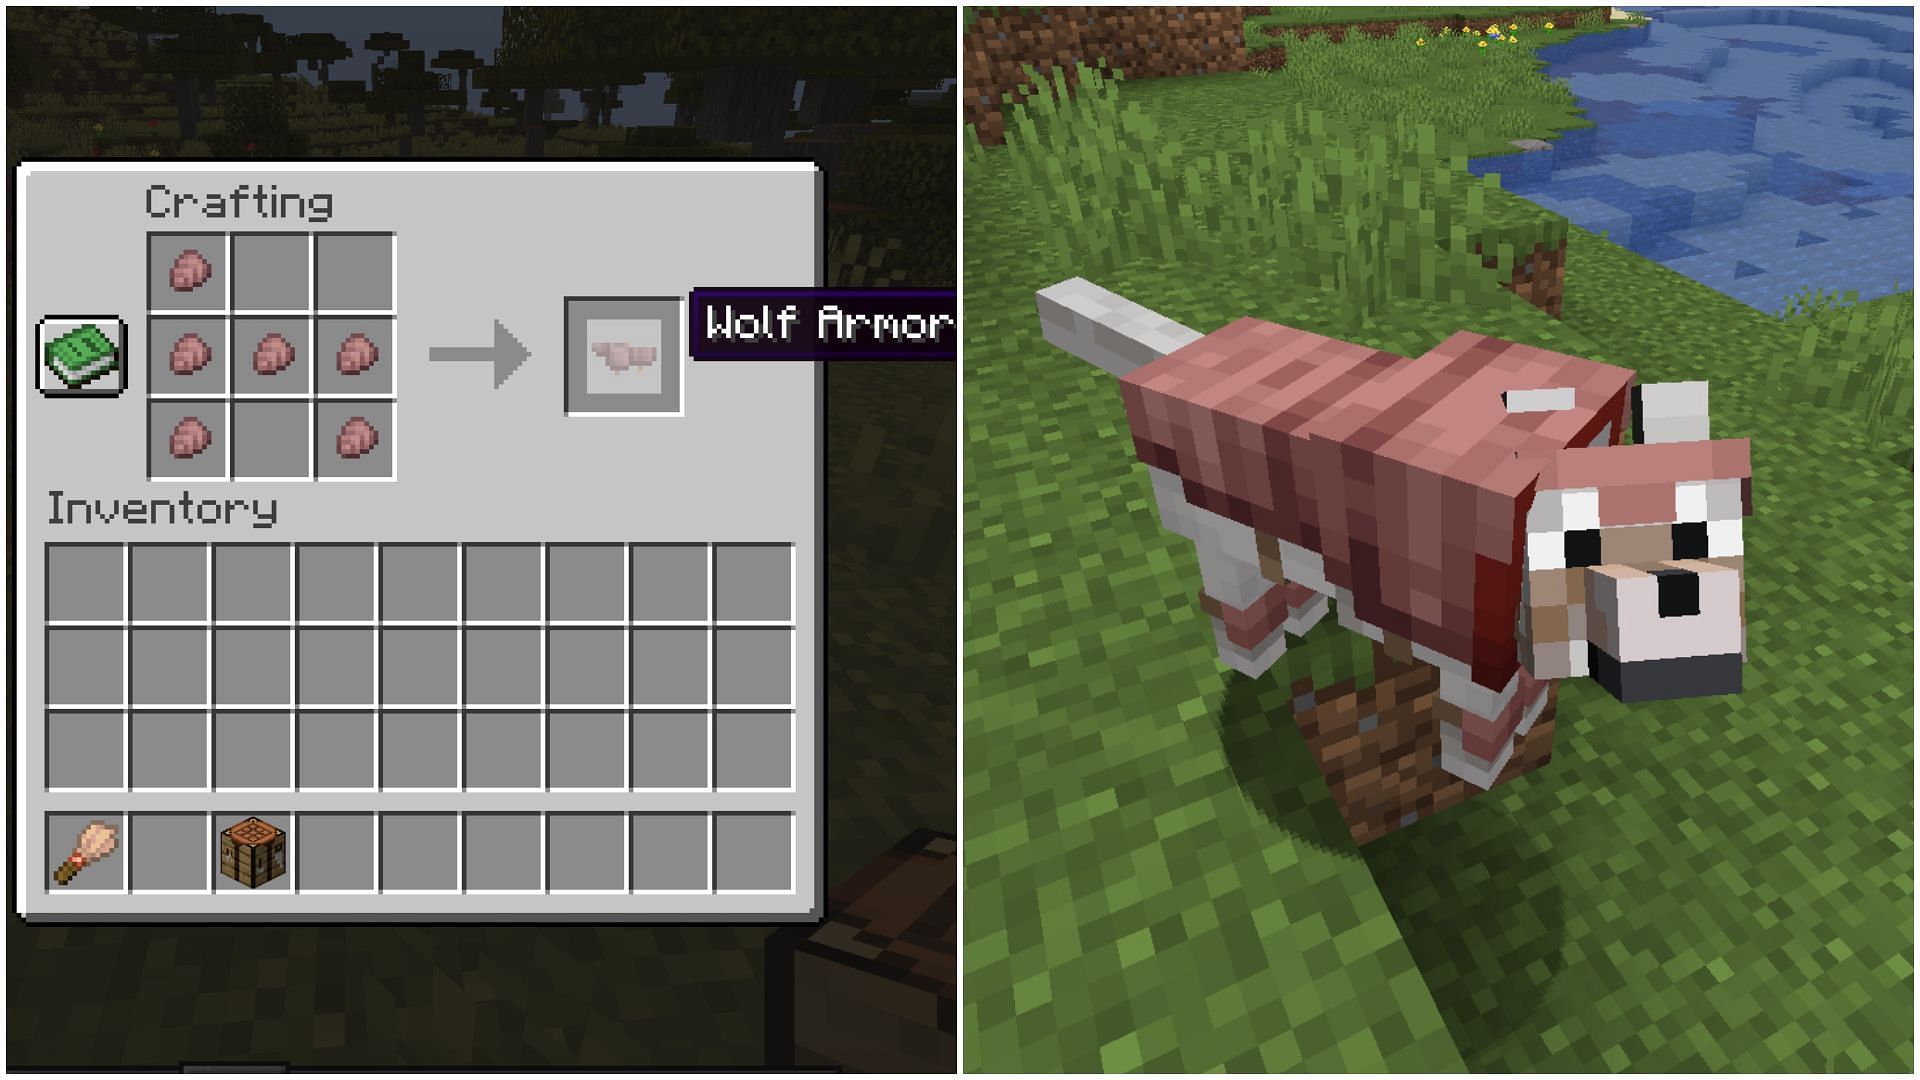 Armadillo scutes that are obtained by brushing armadillos can be used to craft wolf armor. (Image via Mojang Studios)